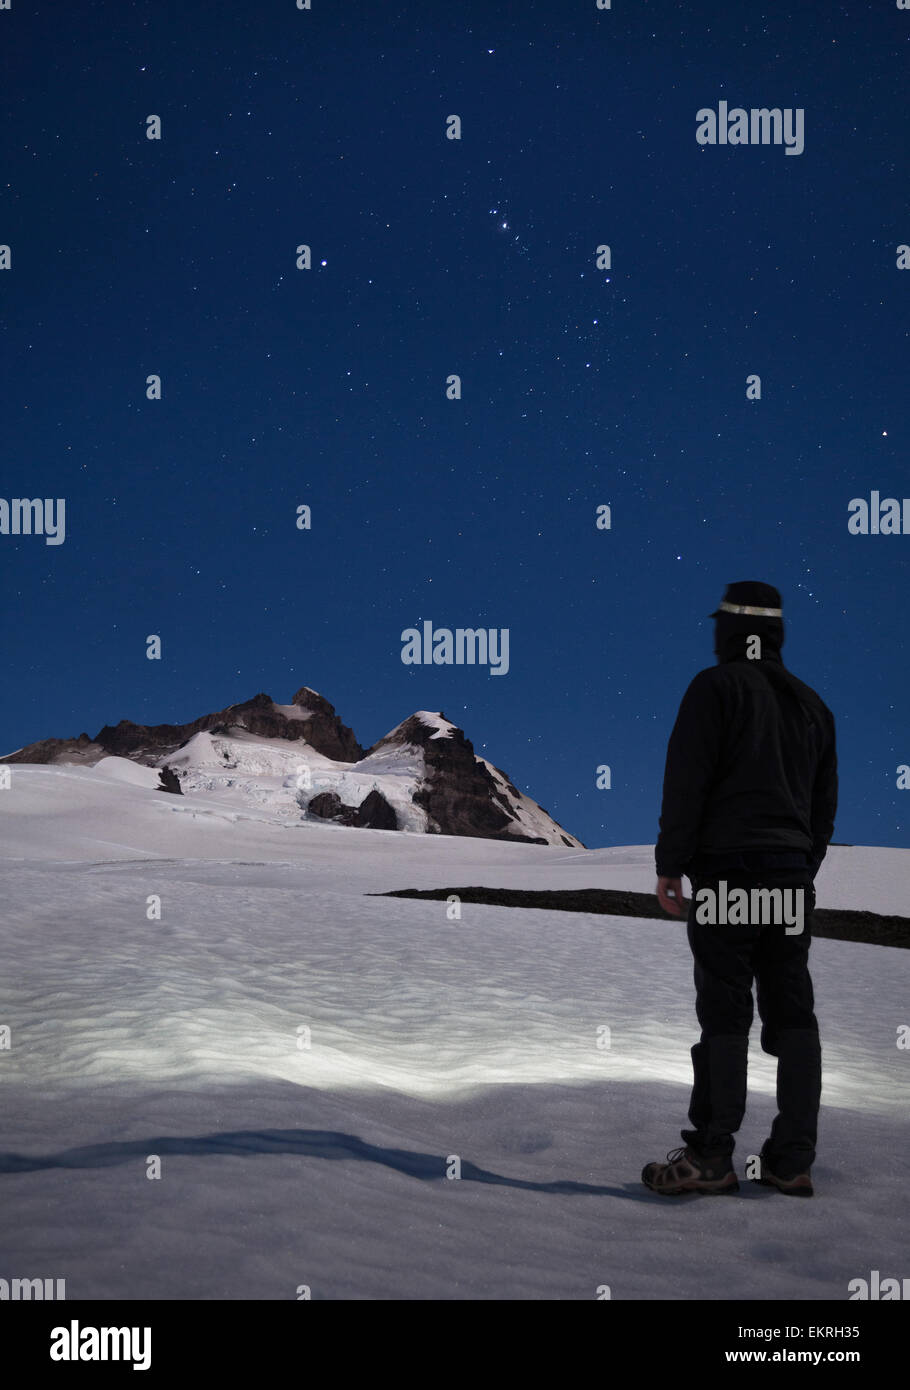 Hiker man watching and contemplating the stars and mountains at night Stock Photo